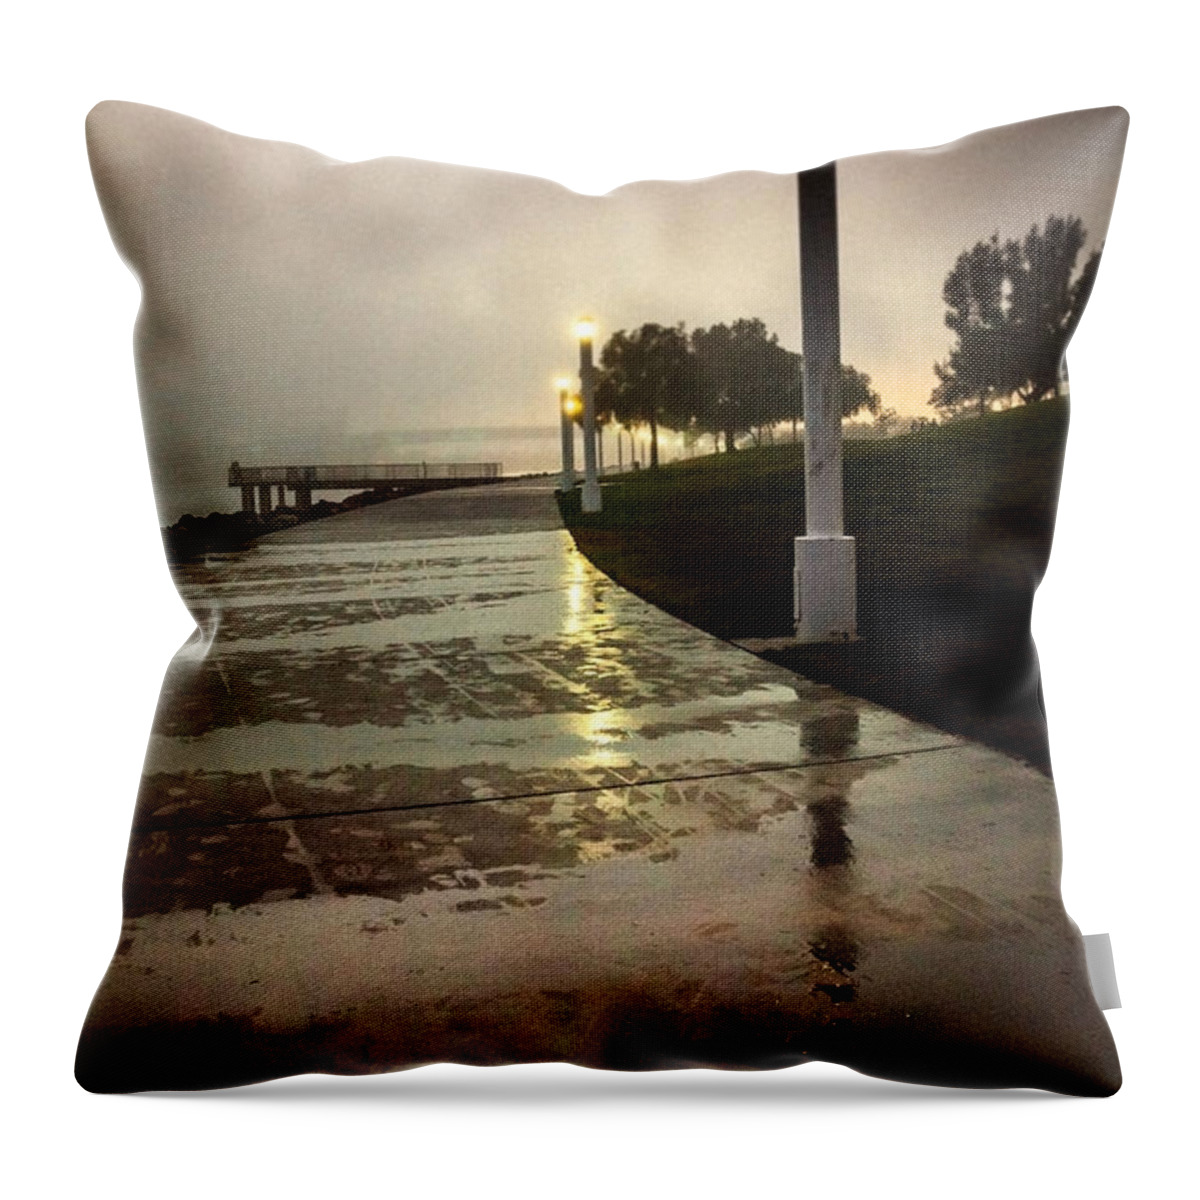 Coast Living Throw Pillow featuring the photograph Quiet Stroll by Denise Dube